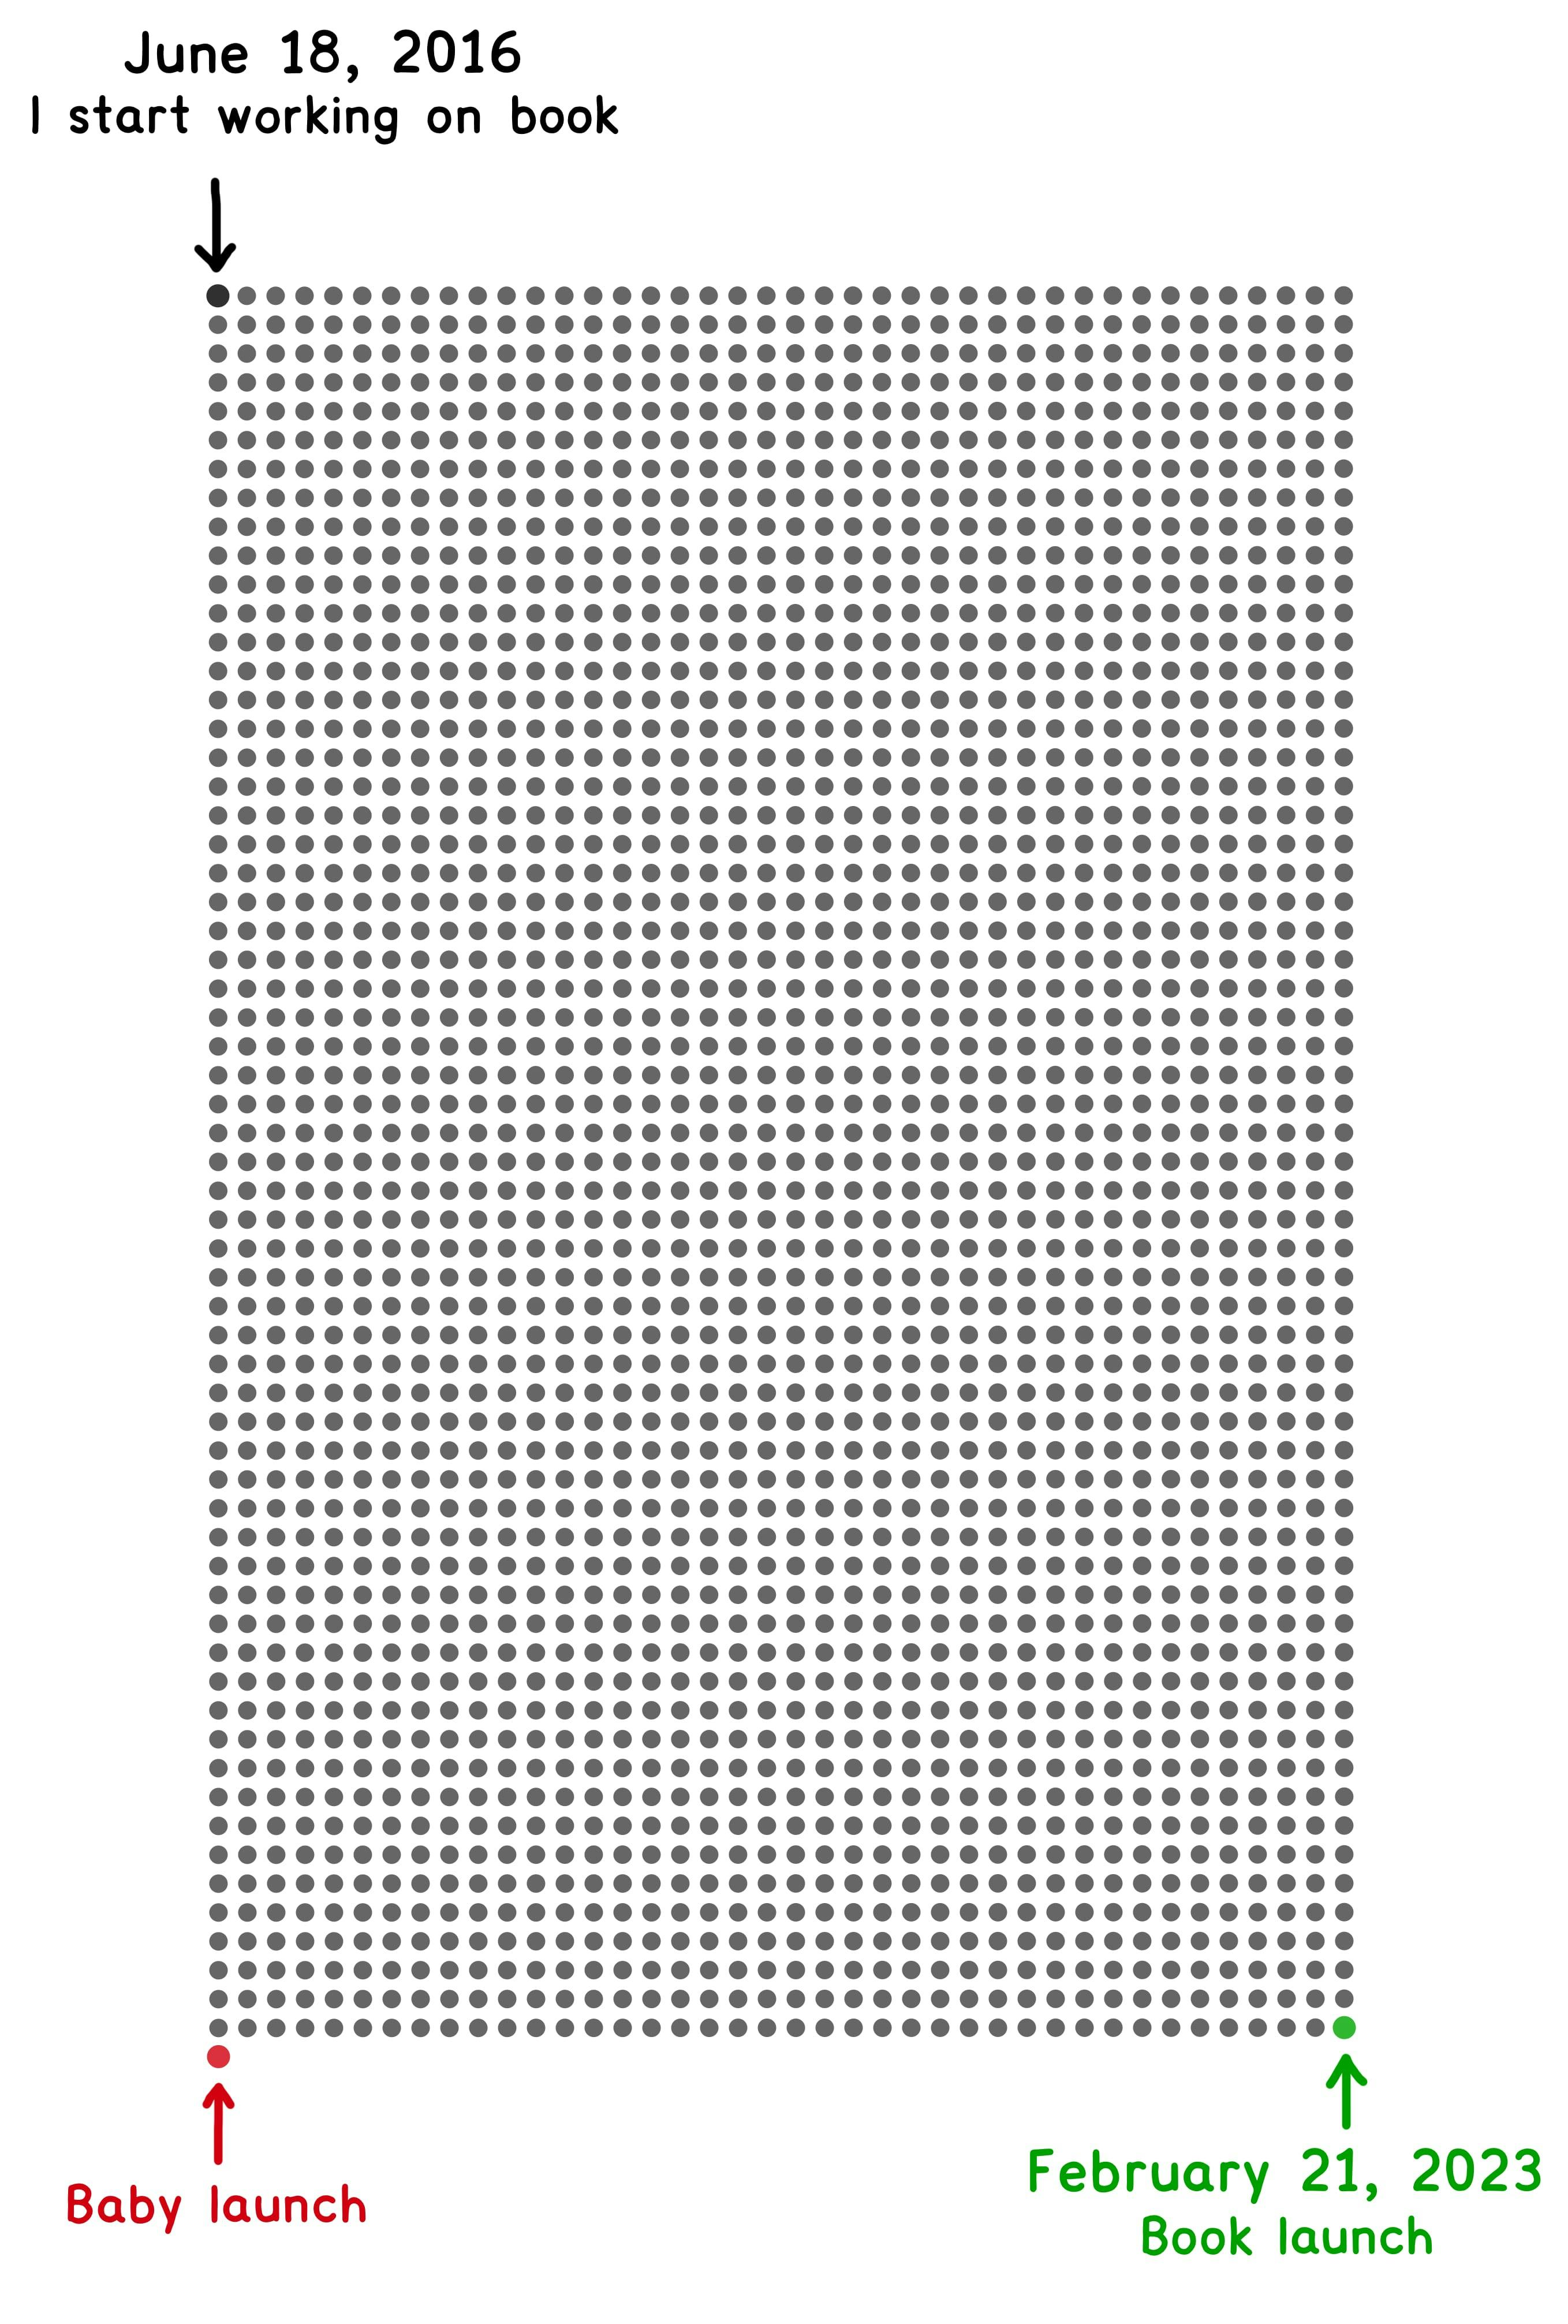 Same grid of dots, except Baby launch is the day after Book launch.